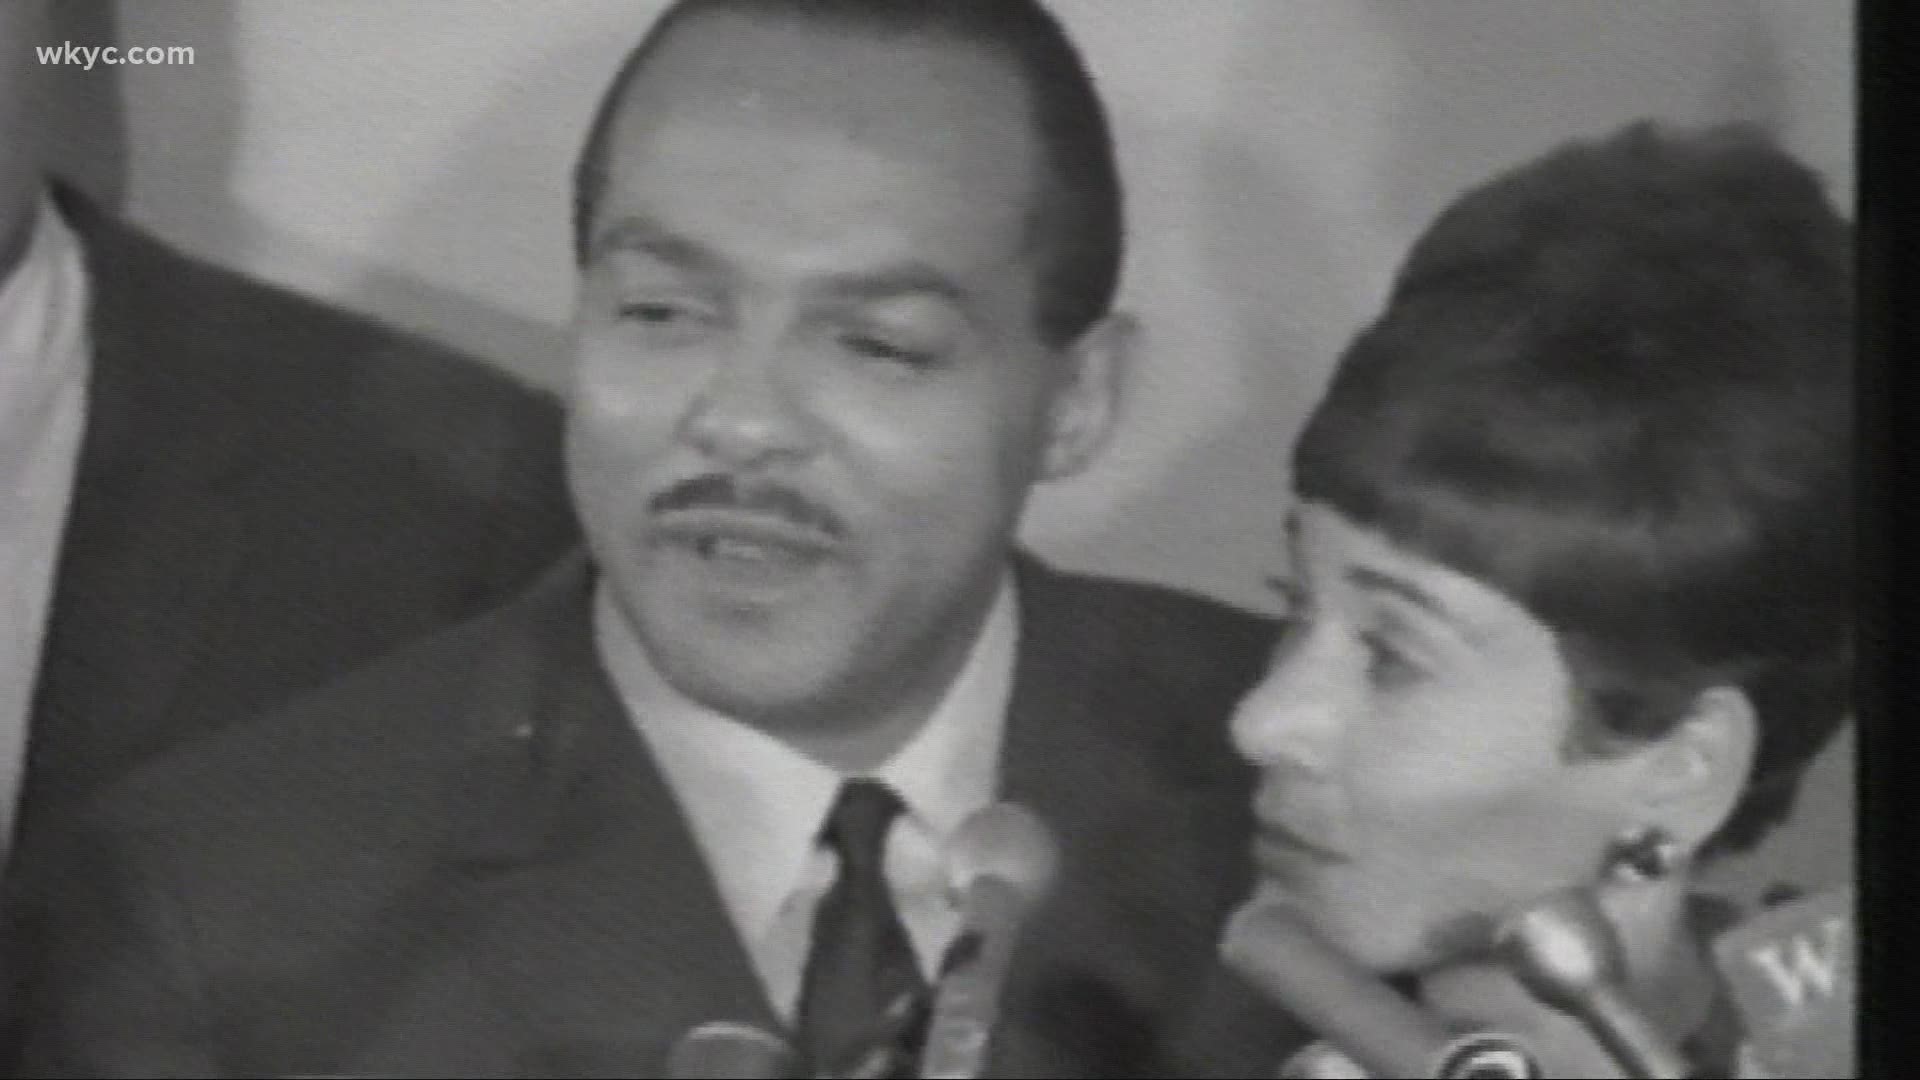 Cleveland has played a pivotal role in the political stage over the years. But the city's mayoral race in 1967 made waves around the world.